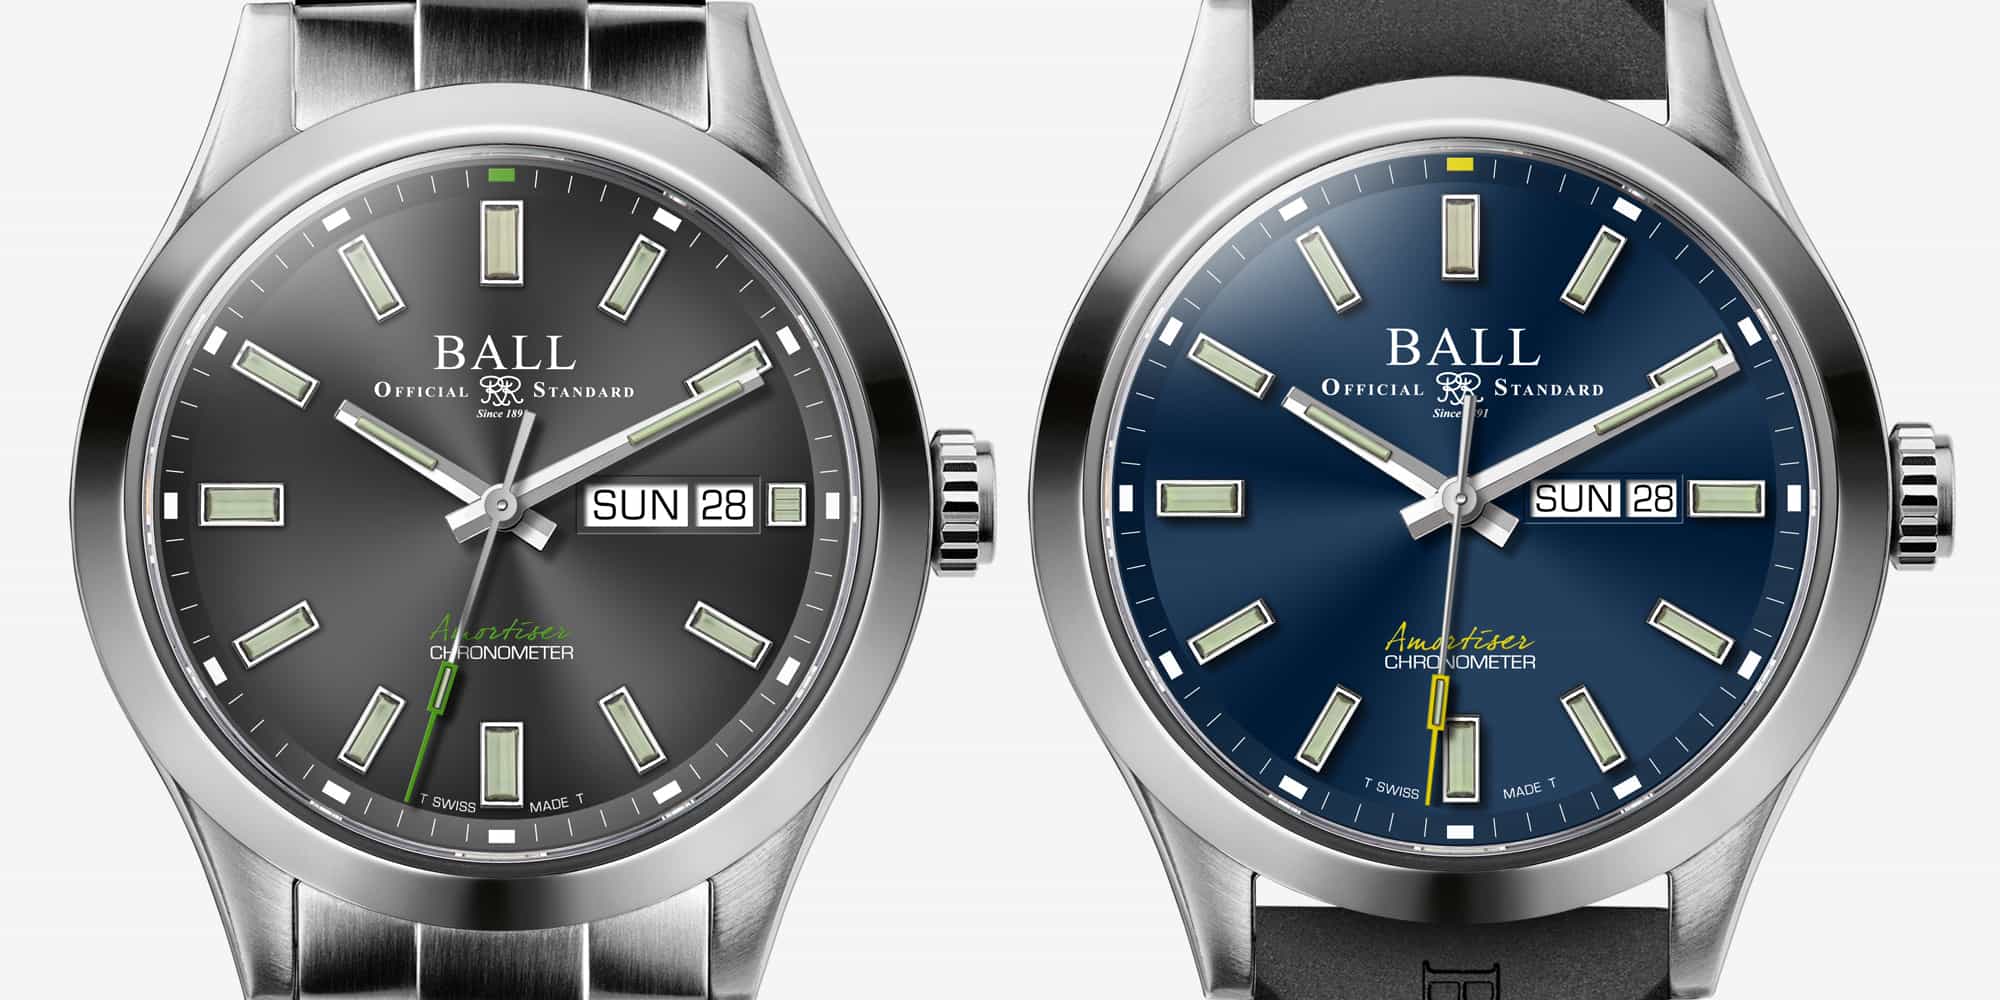 Introducing the Engineer III Endurance 1917 from Ball, Available Now at a Special Pre-Order Price